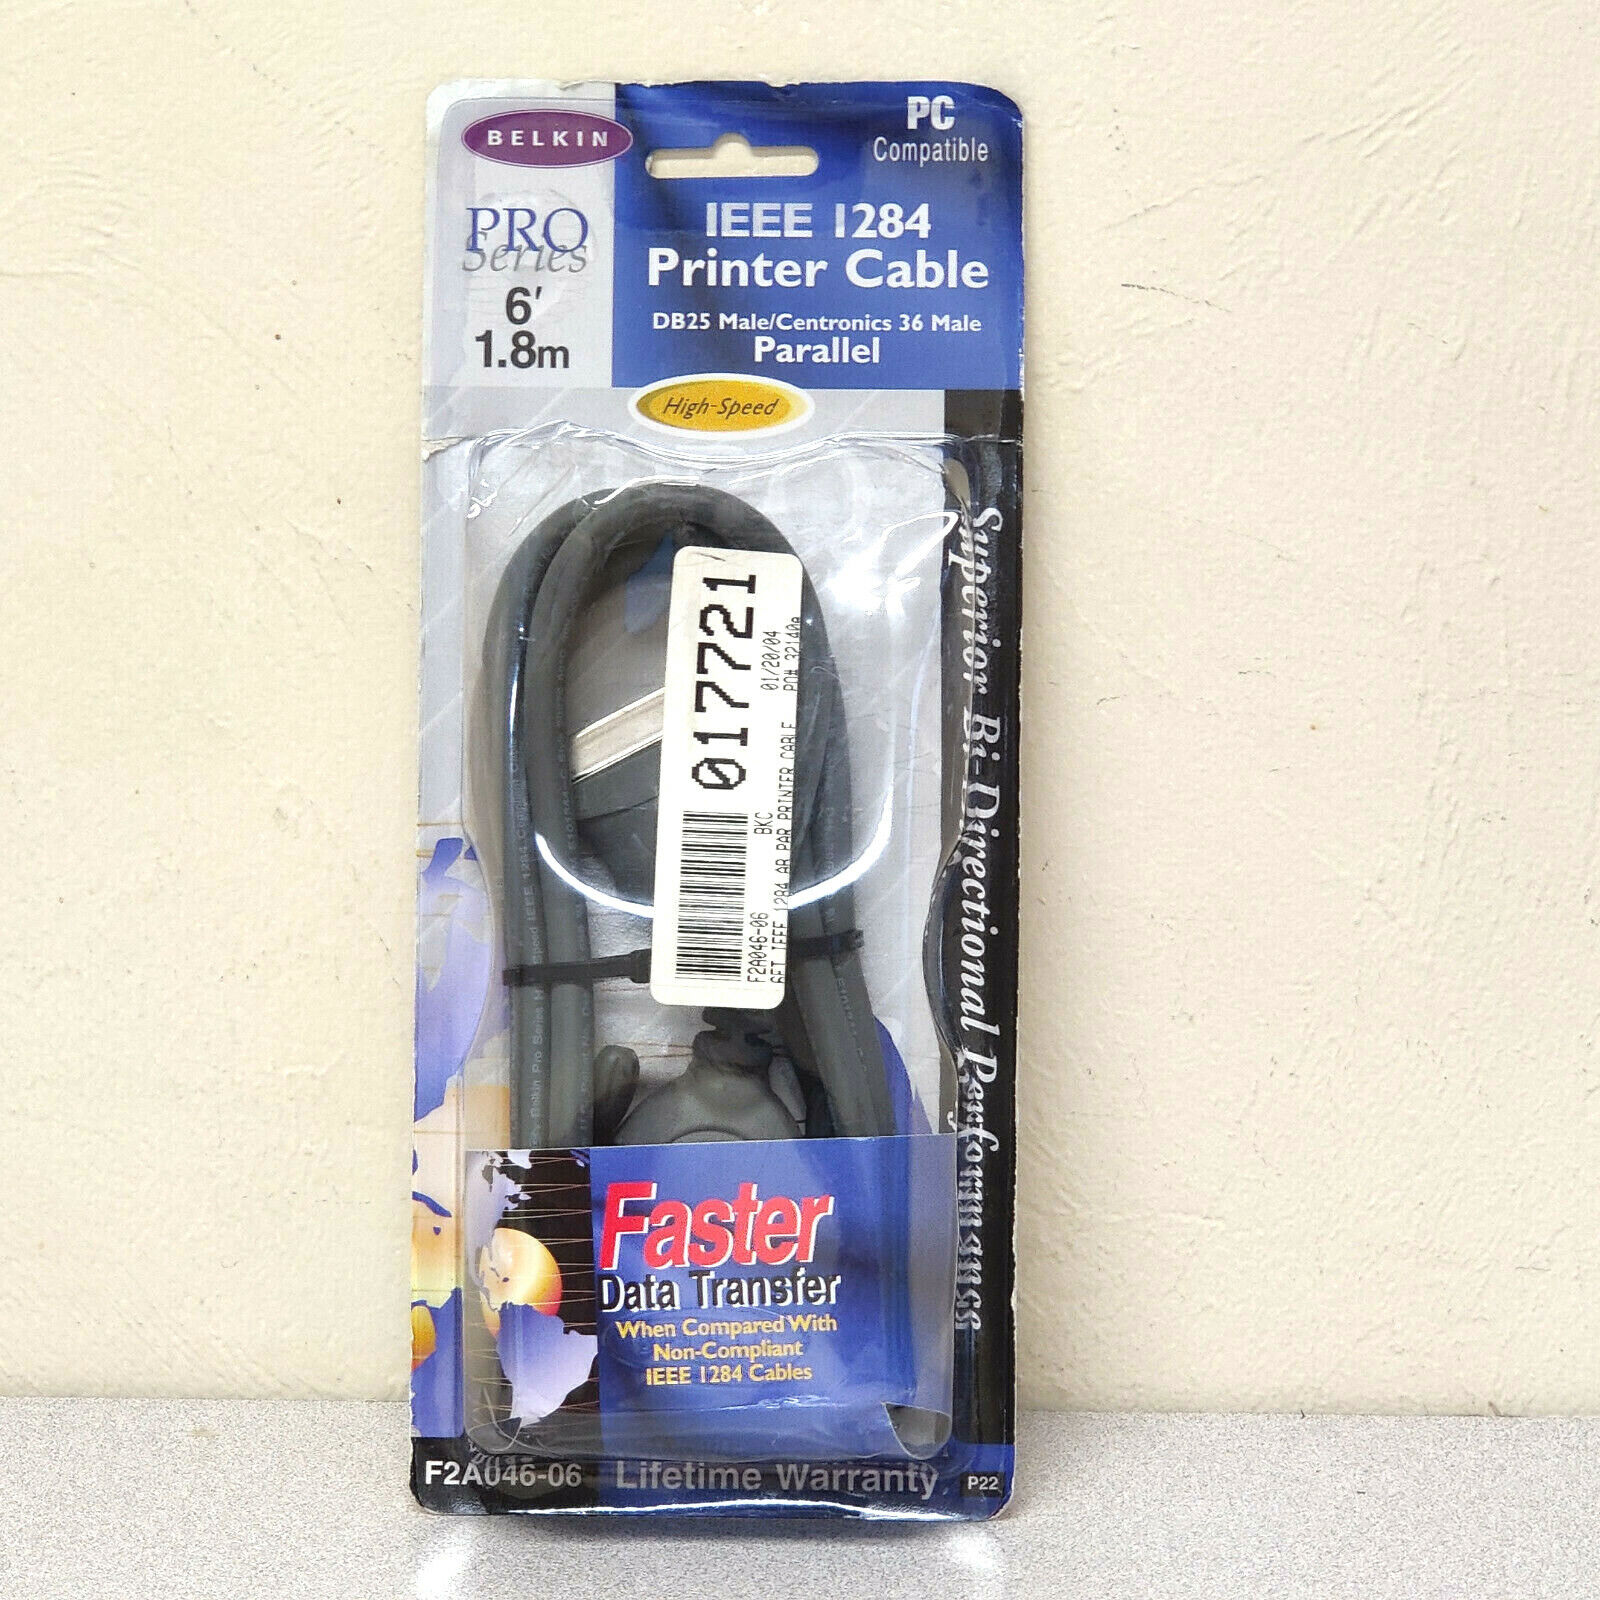 NEW Belkin F2A046-06 IEEE 1284 6' Parallel Printer Cable  Male Pro Series